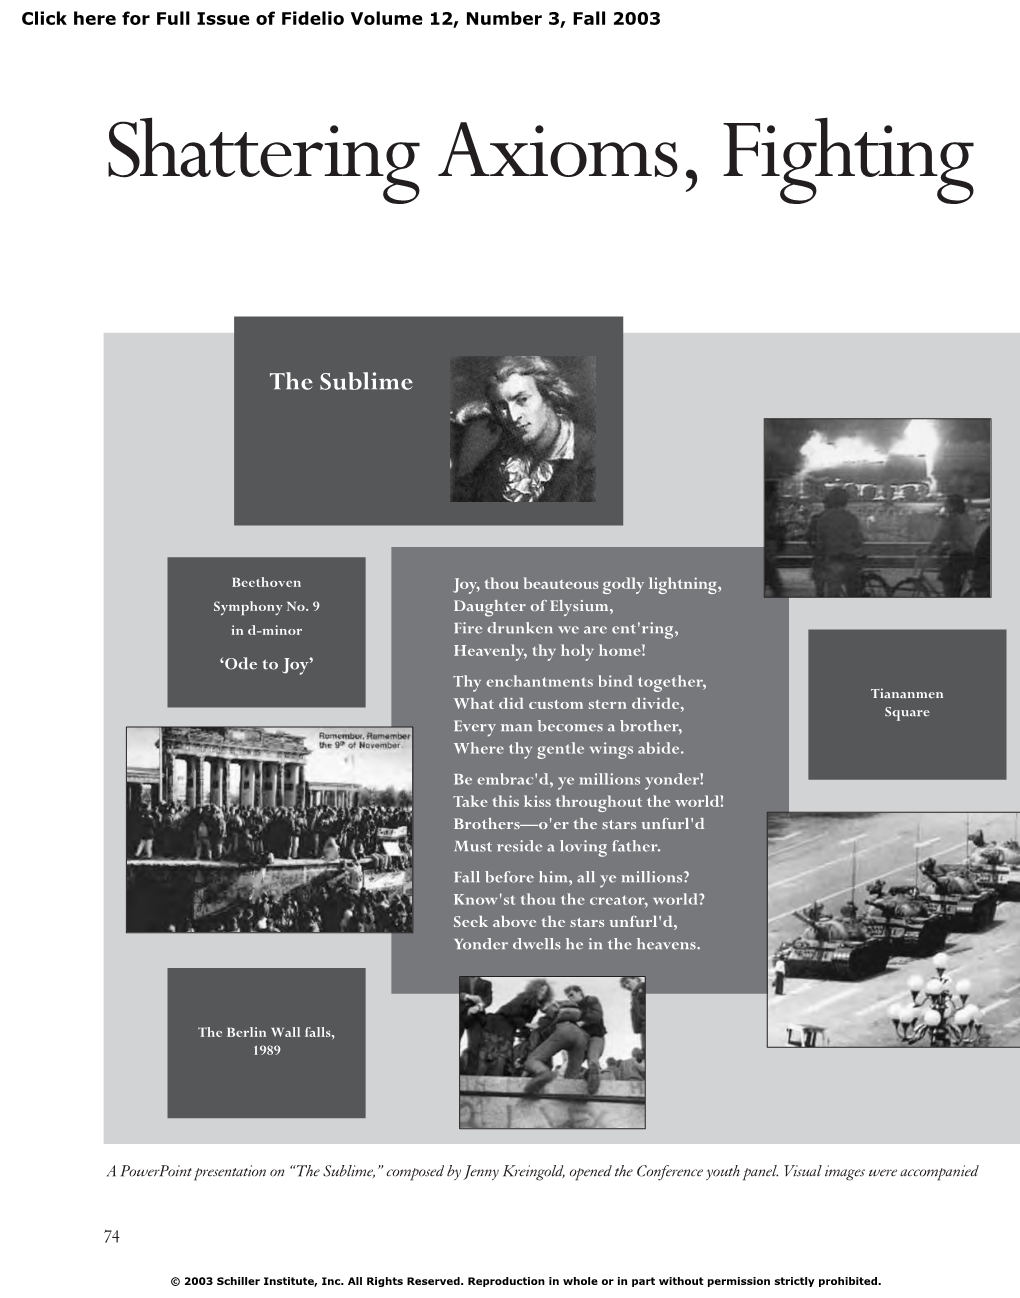 Shattering Axioms, Fighting for Our Future!” Was Presented by the Larouche Youth Movement at the Schiller Institute/I.C.L.C